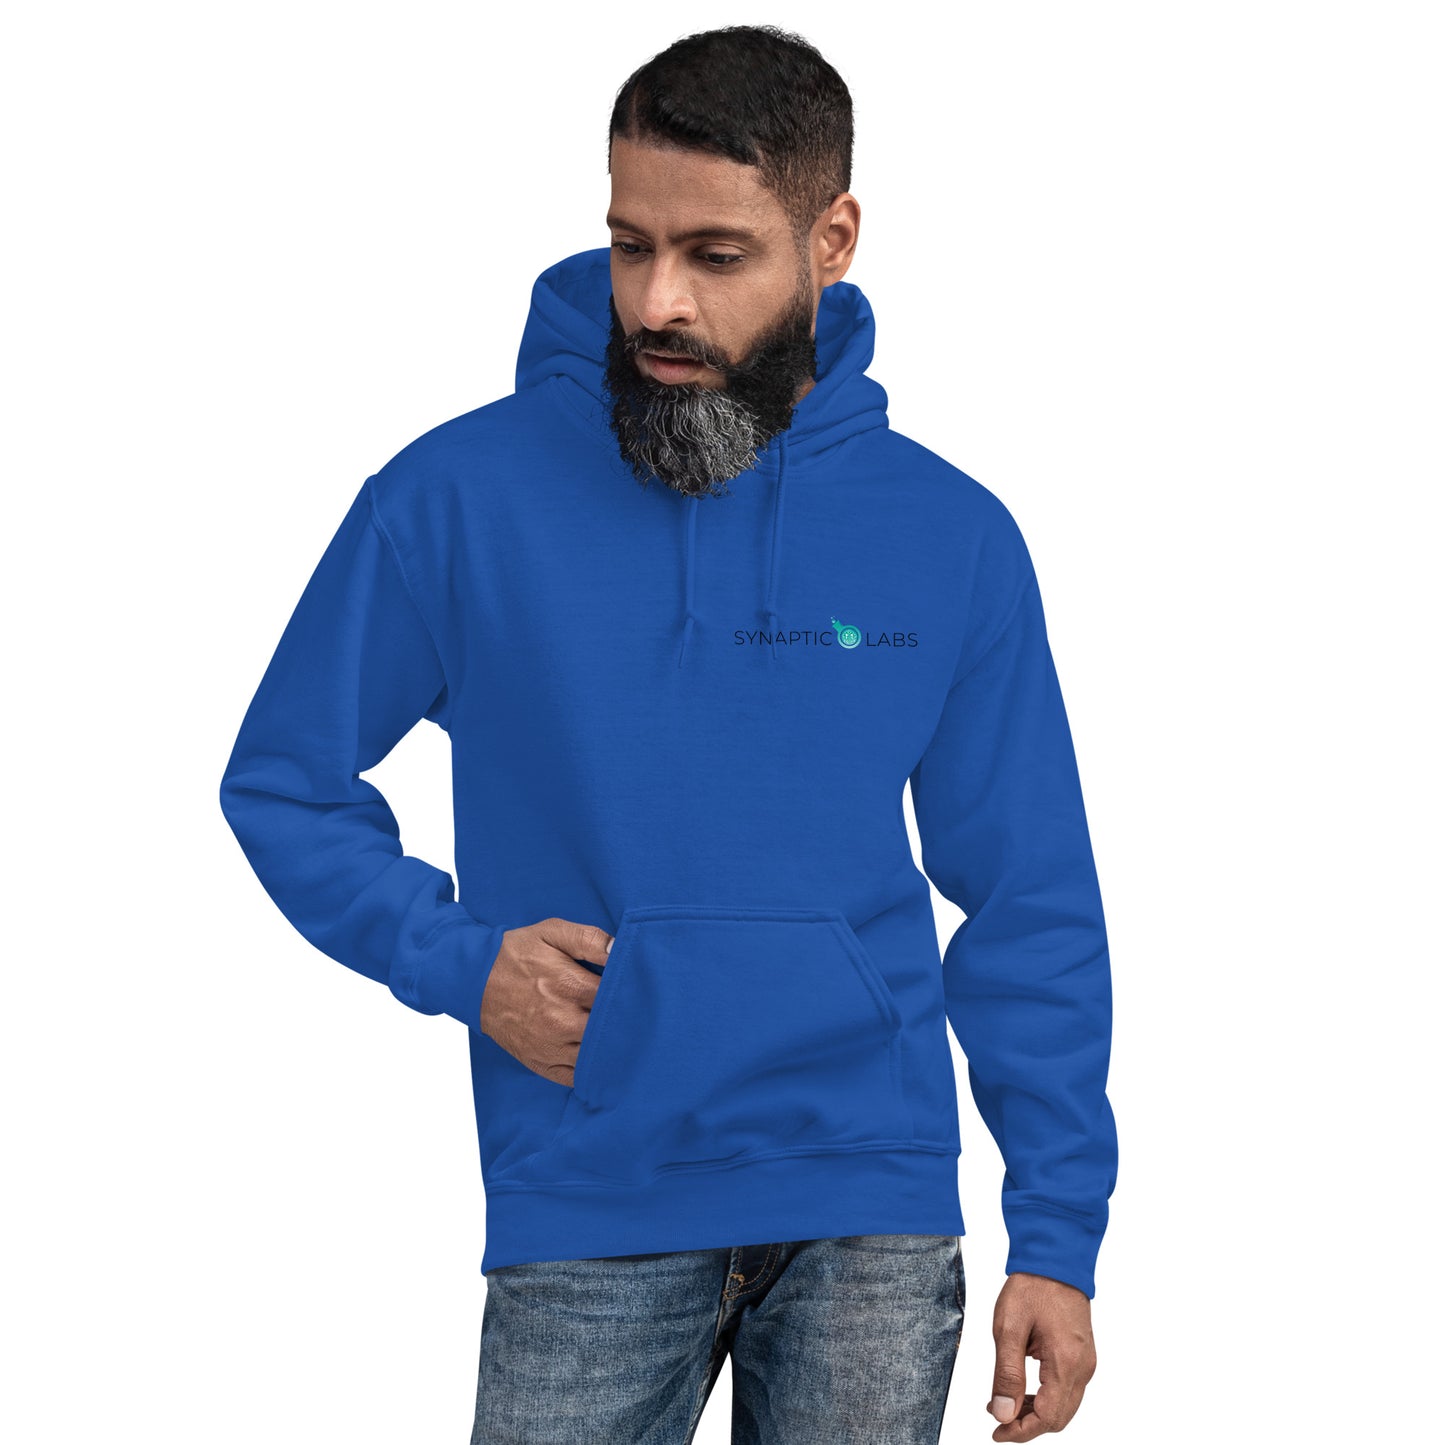 Synaptic Hoodie